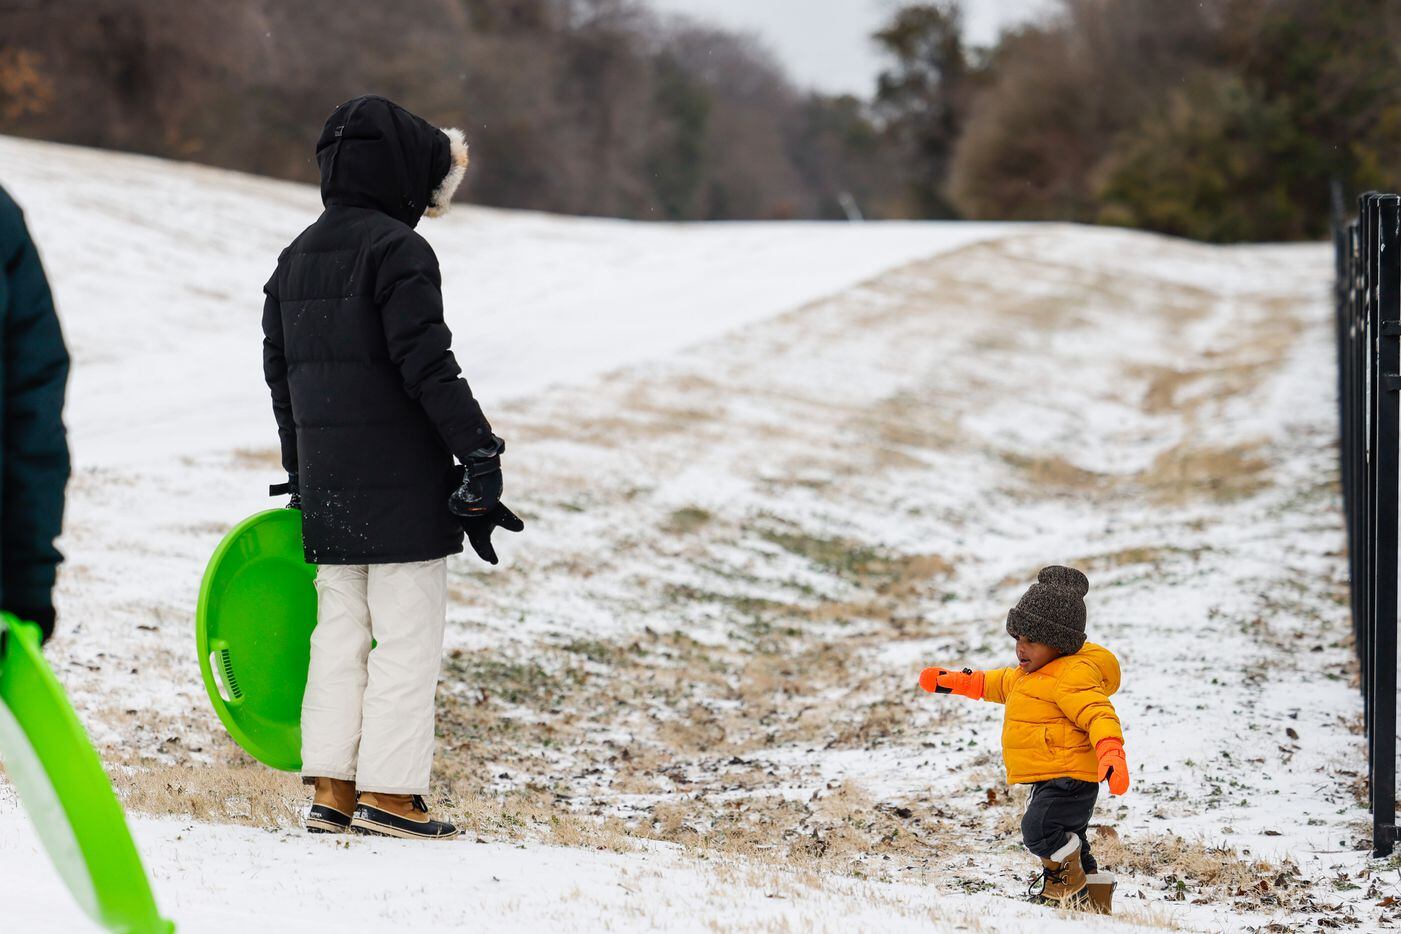 Lauren Jarret, 34, with Wesley Jarret, 1, as they play with sleet near at White Rock Lake in...